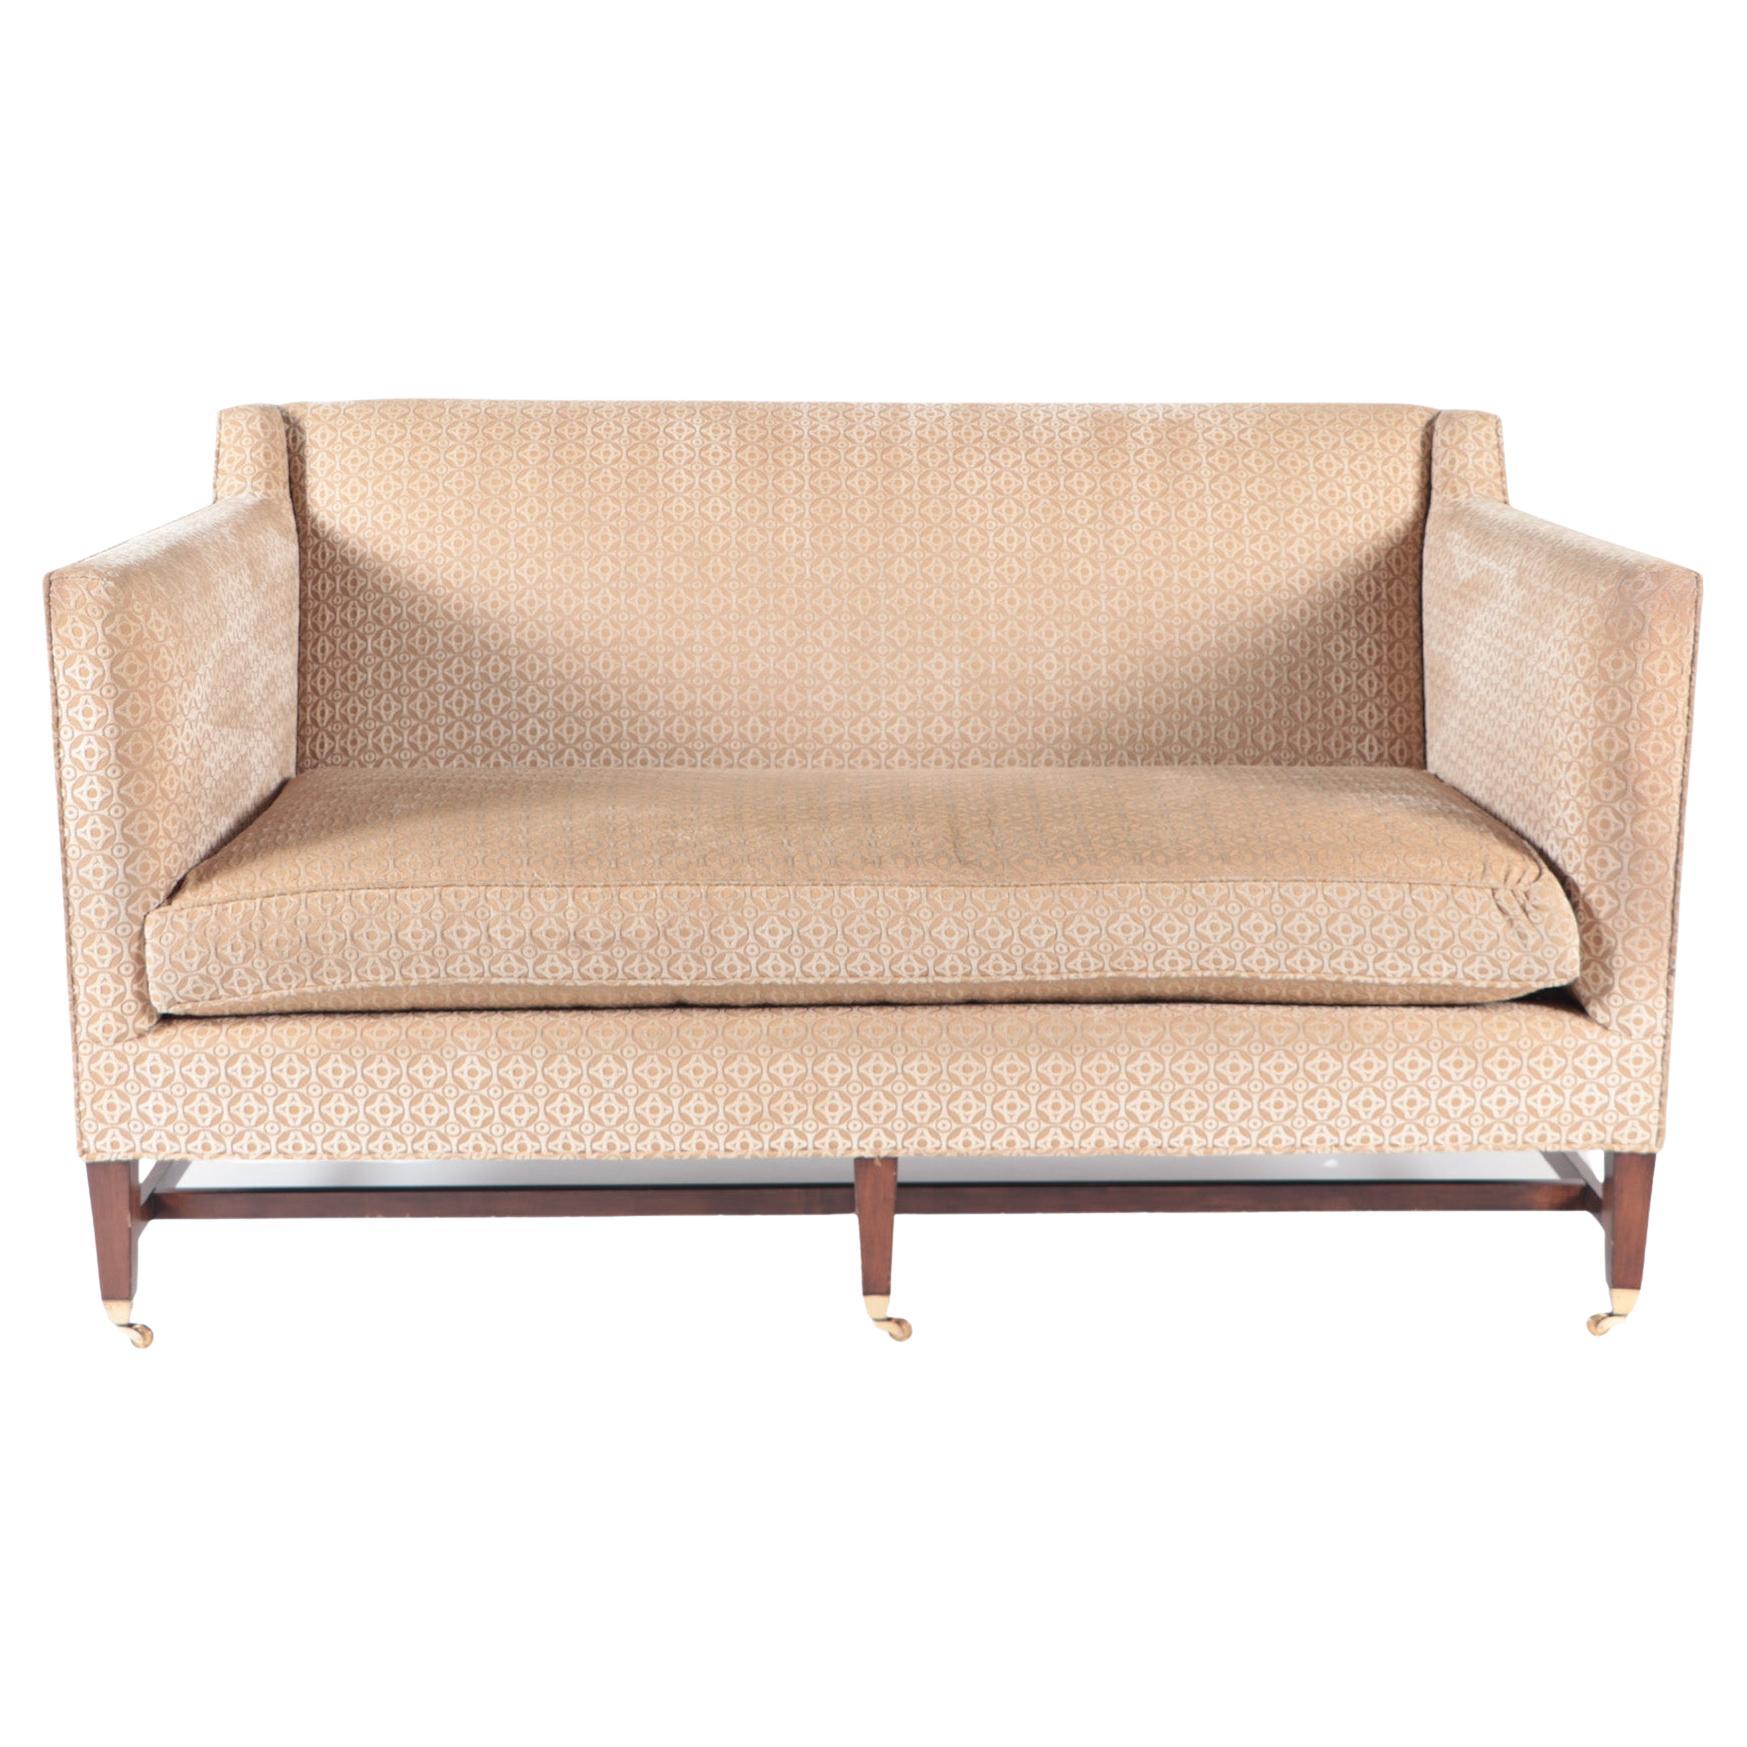 A Mid Century Modern style Edward Ferrell two seat upholstered sofa, late 20th C For Sale